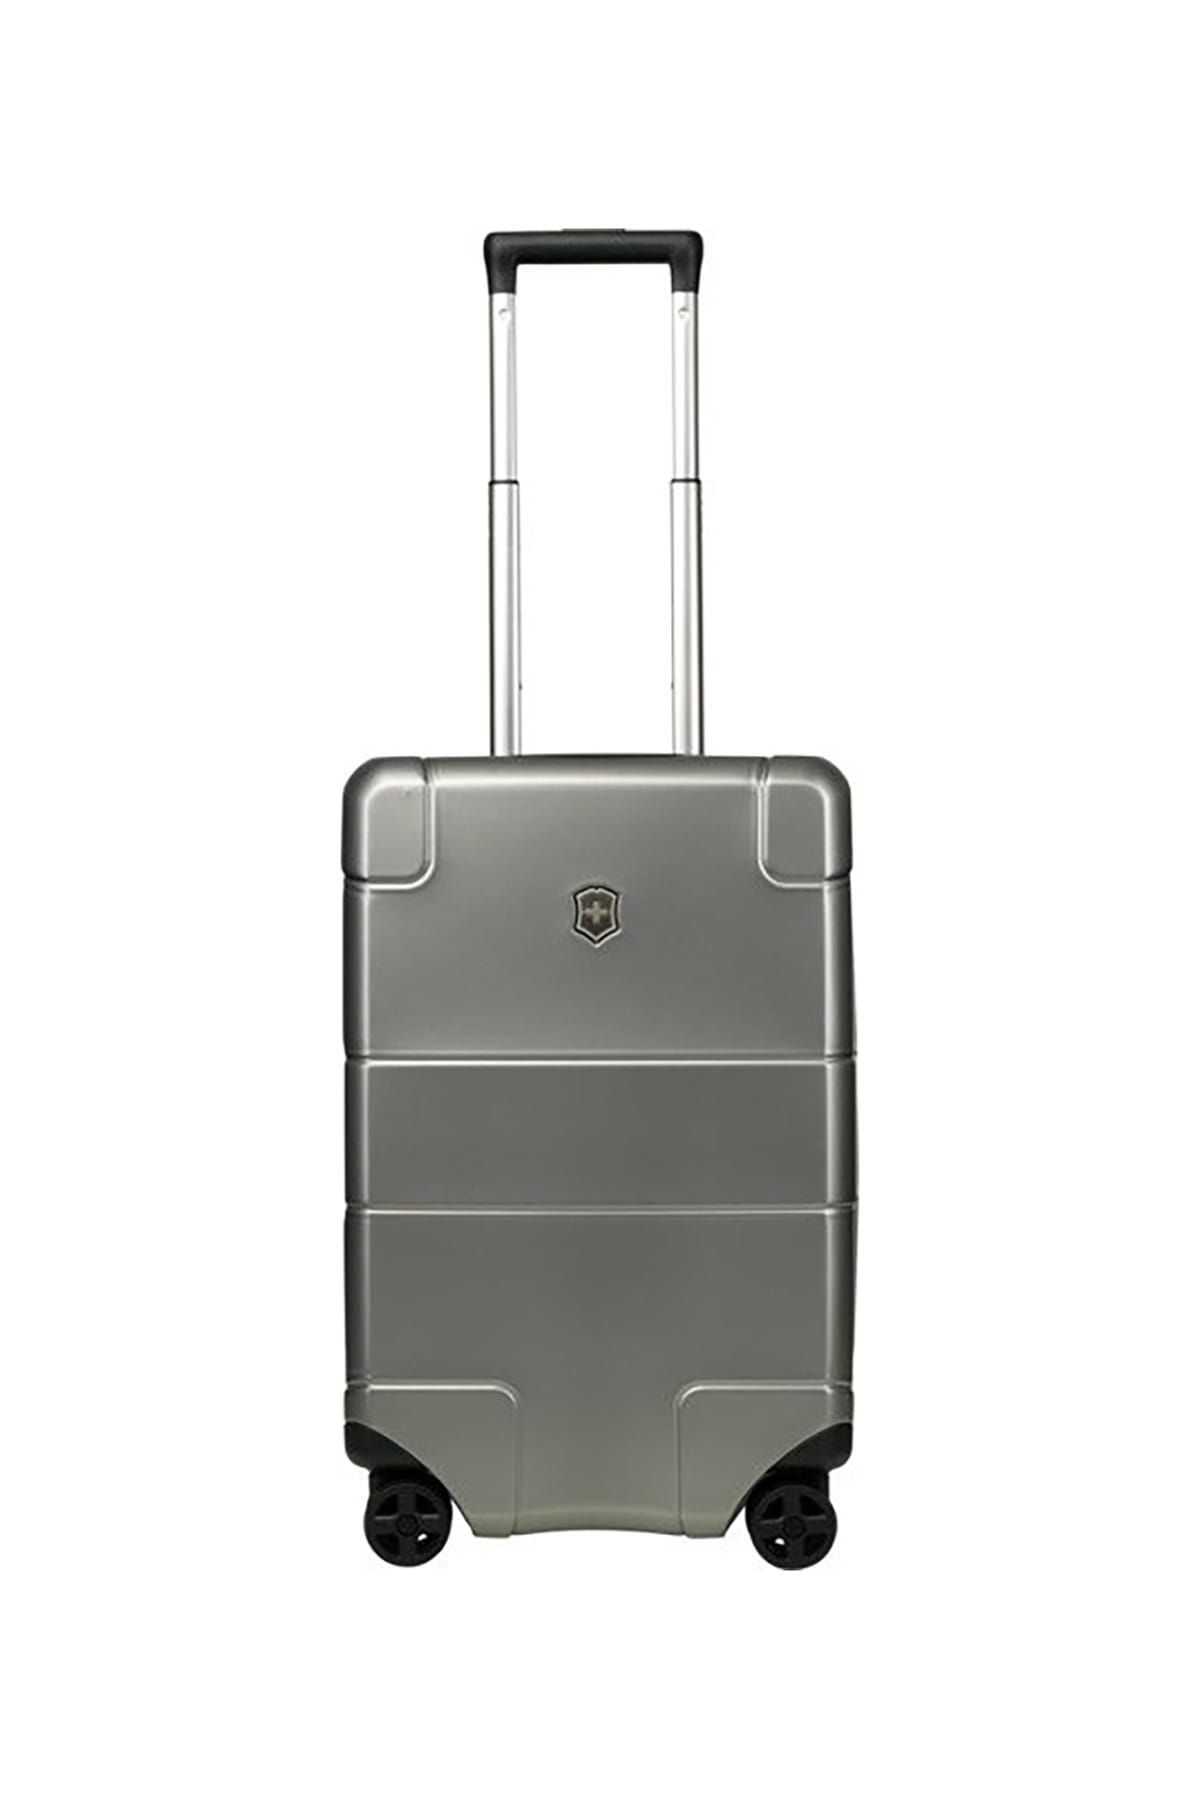 VICTORINOX 602102 Lexicon Frequent Flyer Hardside Carry On Bavul